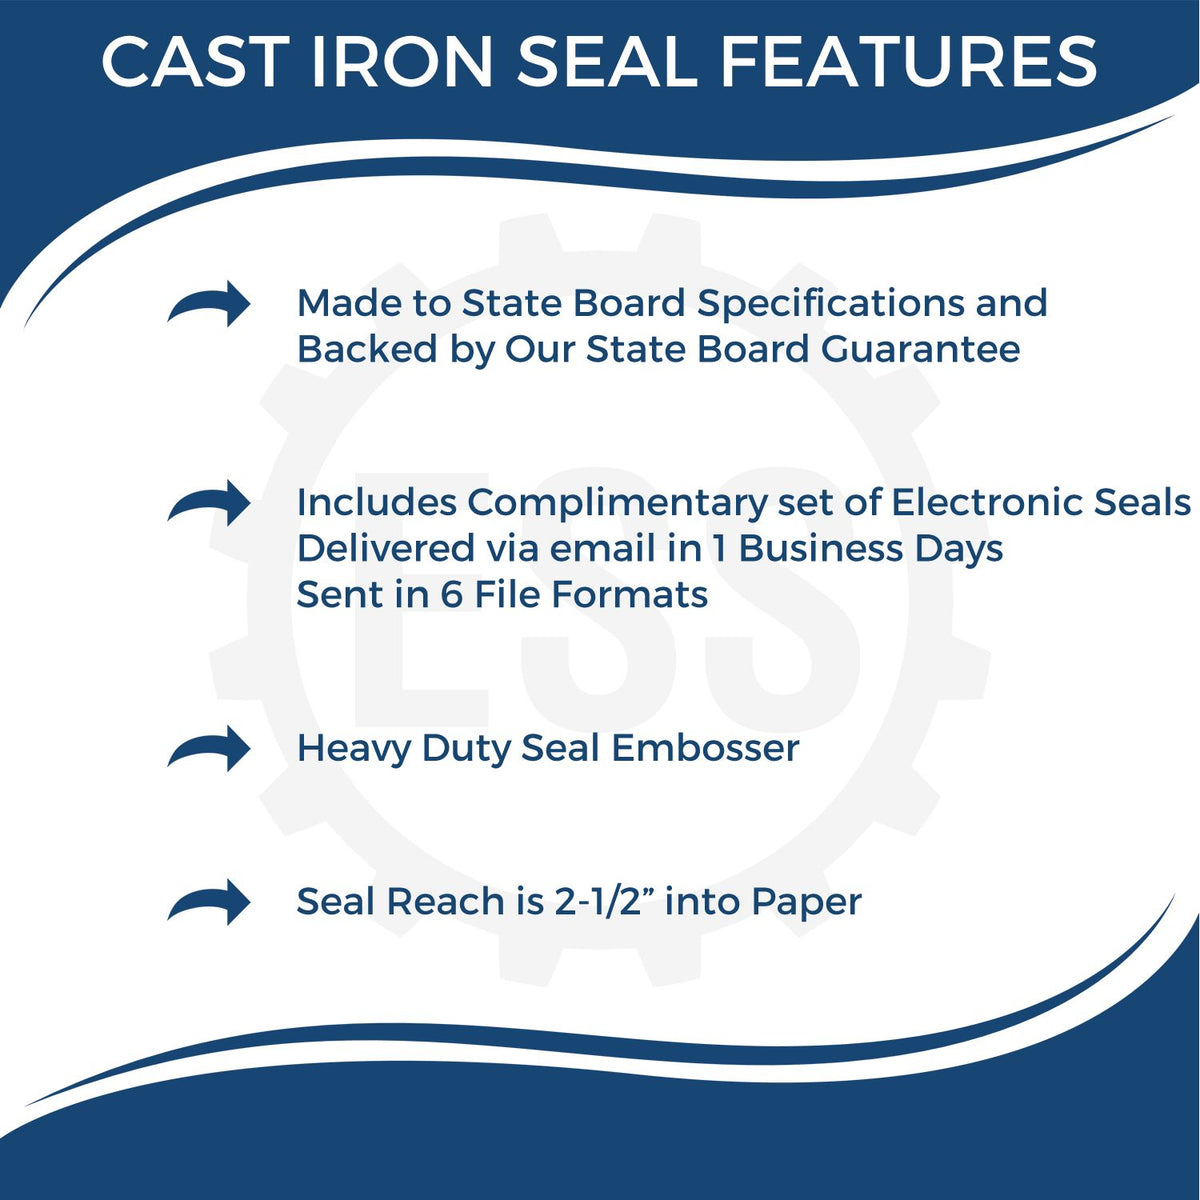 A picture of an infographic highlighting the selling points for the Heavy Duty Cast Iron Illinois Geologist Seal Embosser